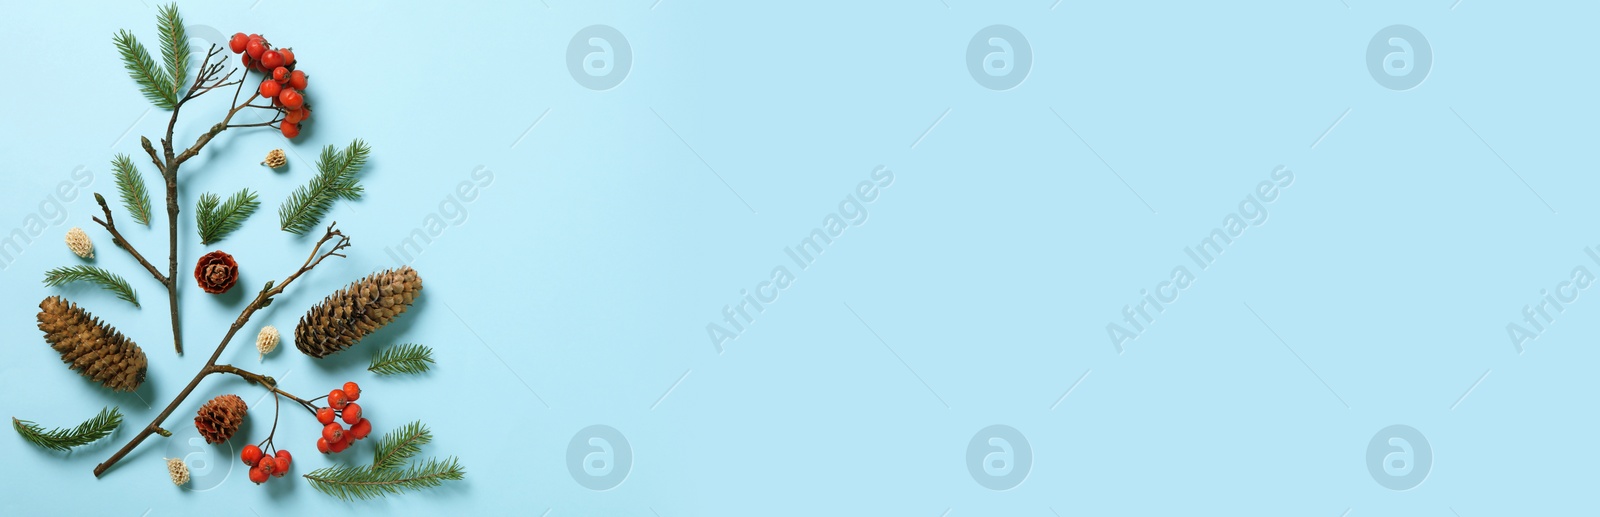 Image of Flat lay composition with pinecones on light blue background, space for text. Horizontal banner design